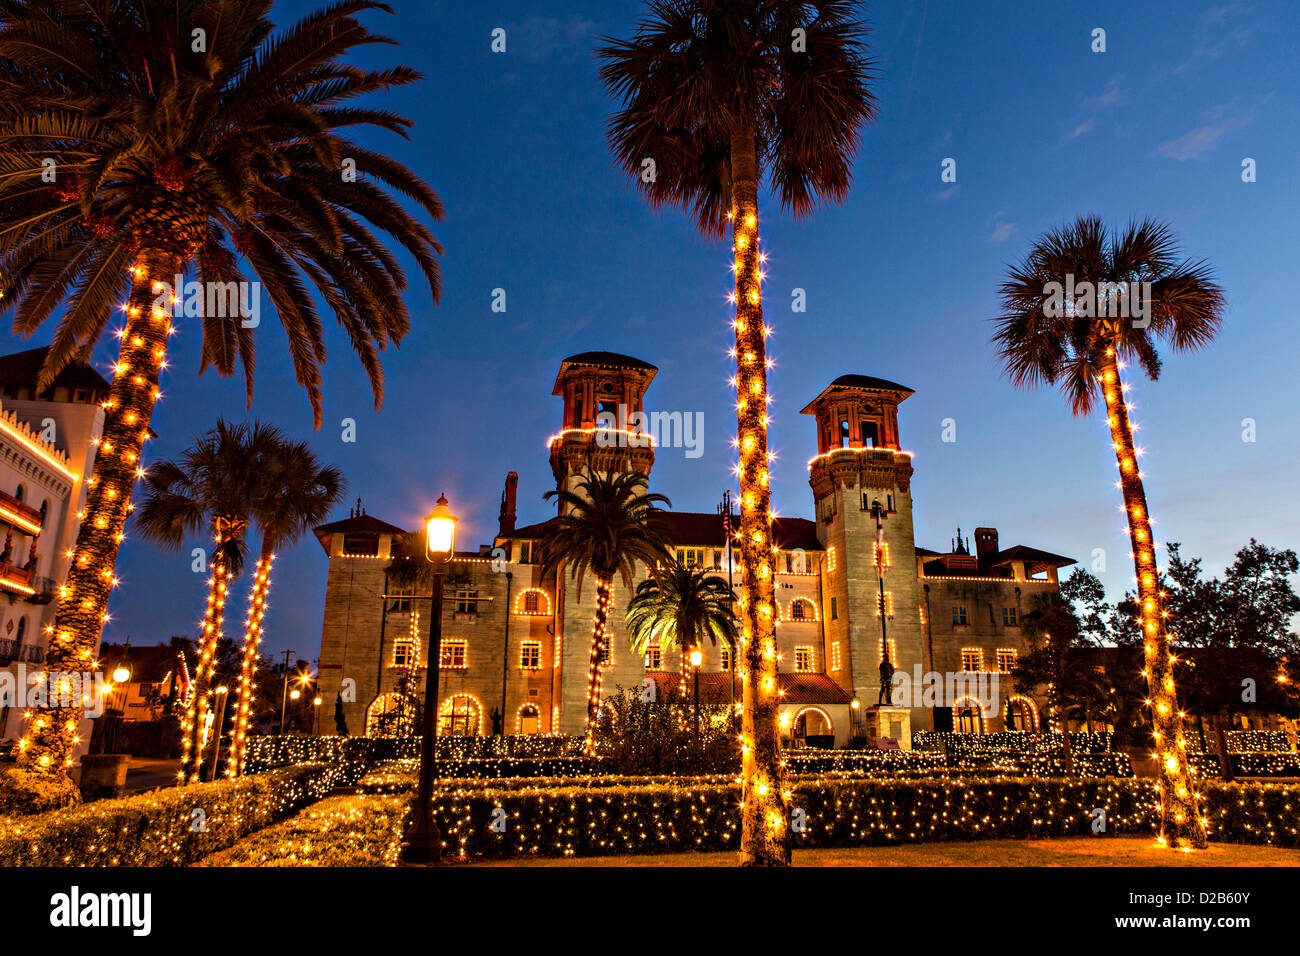 Christmas lights decorate the Lightner Museum in St. Augustine, Florida. The building was originally the Alcazar Hotel. Stock Photo